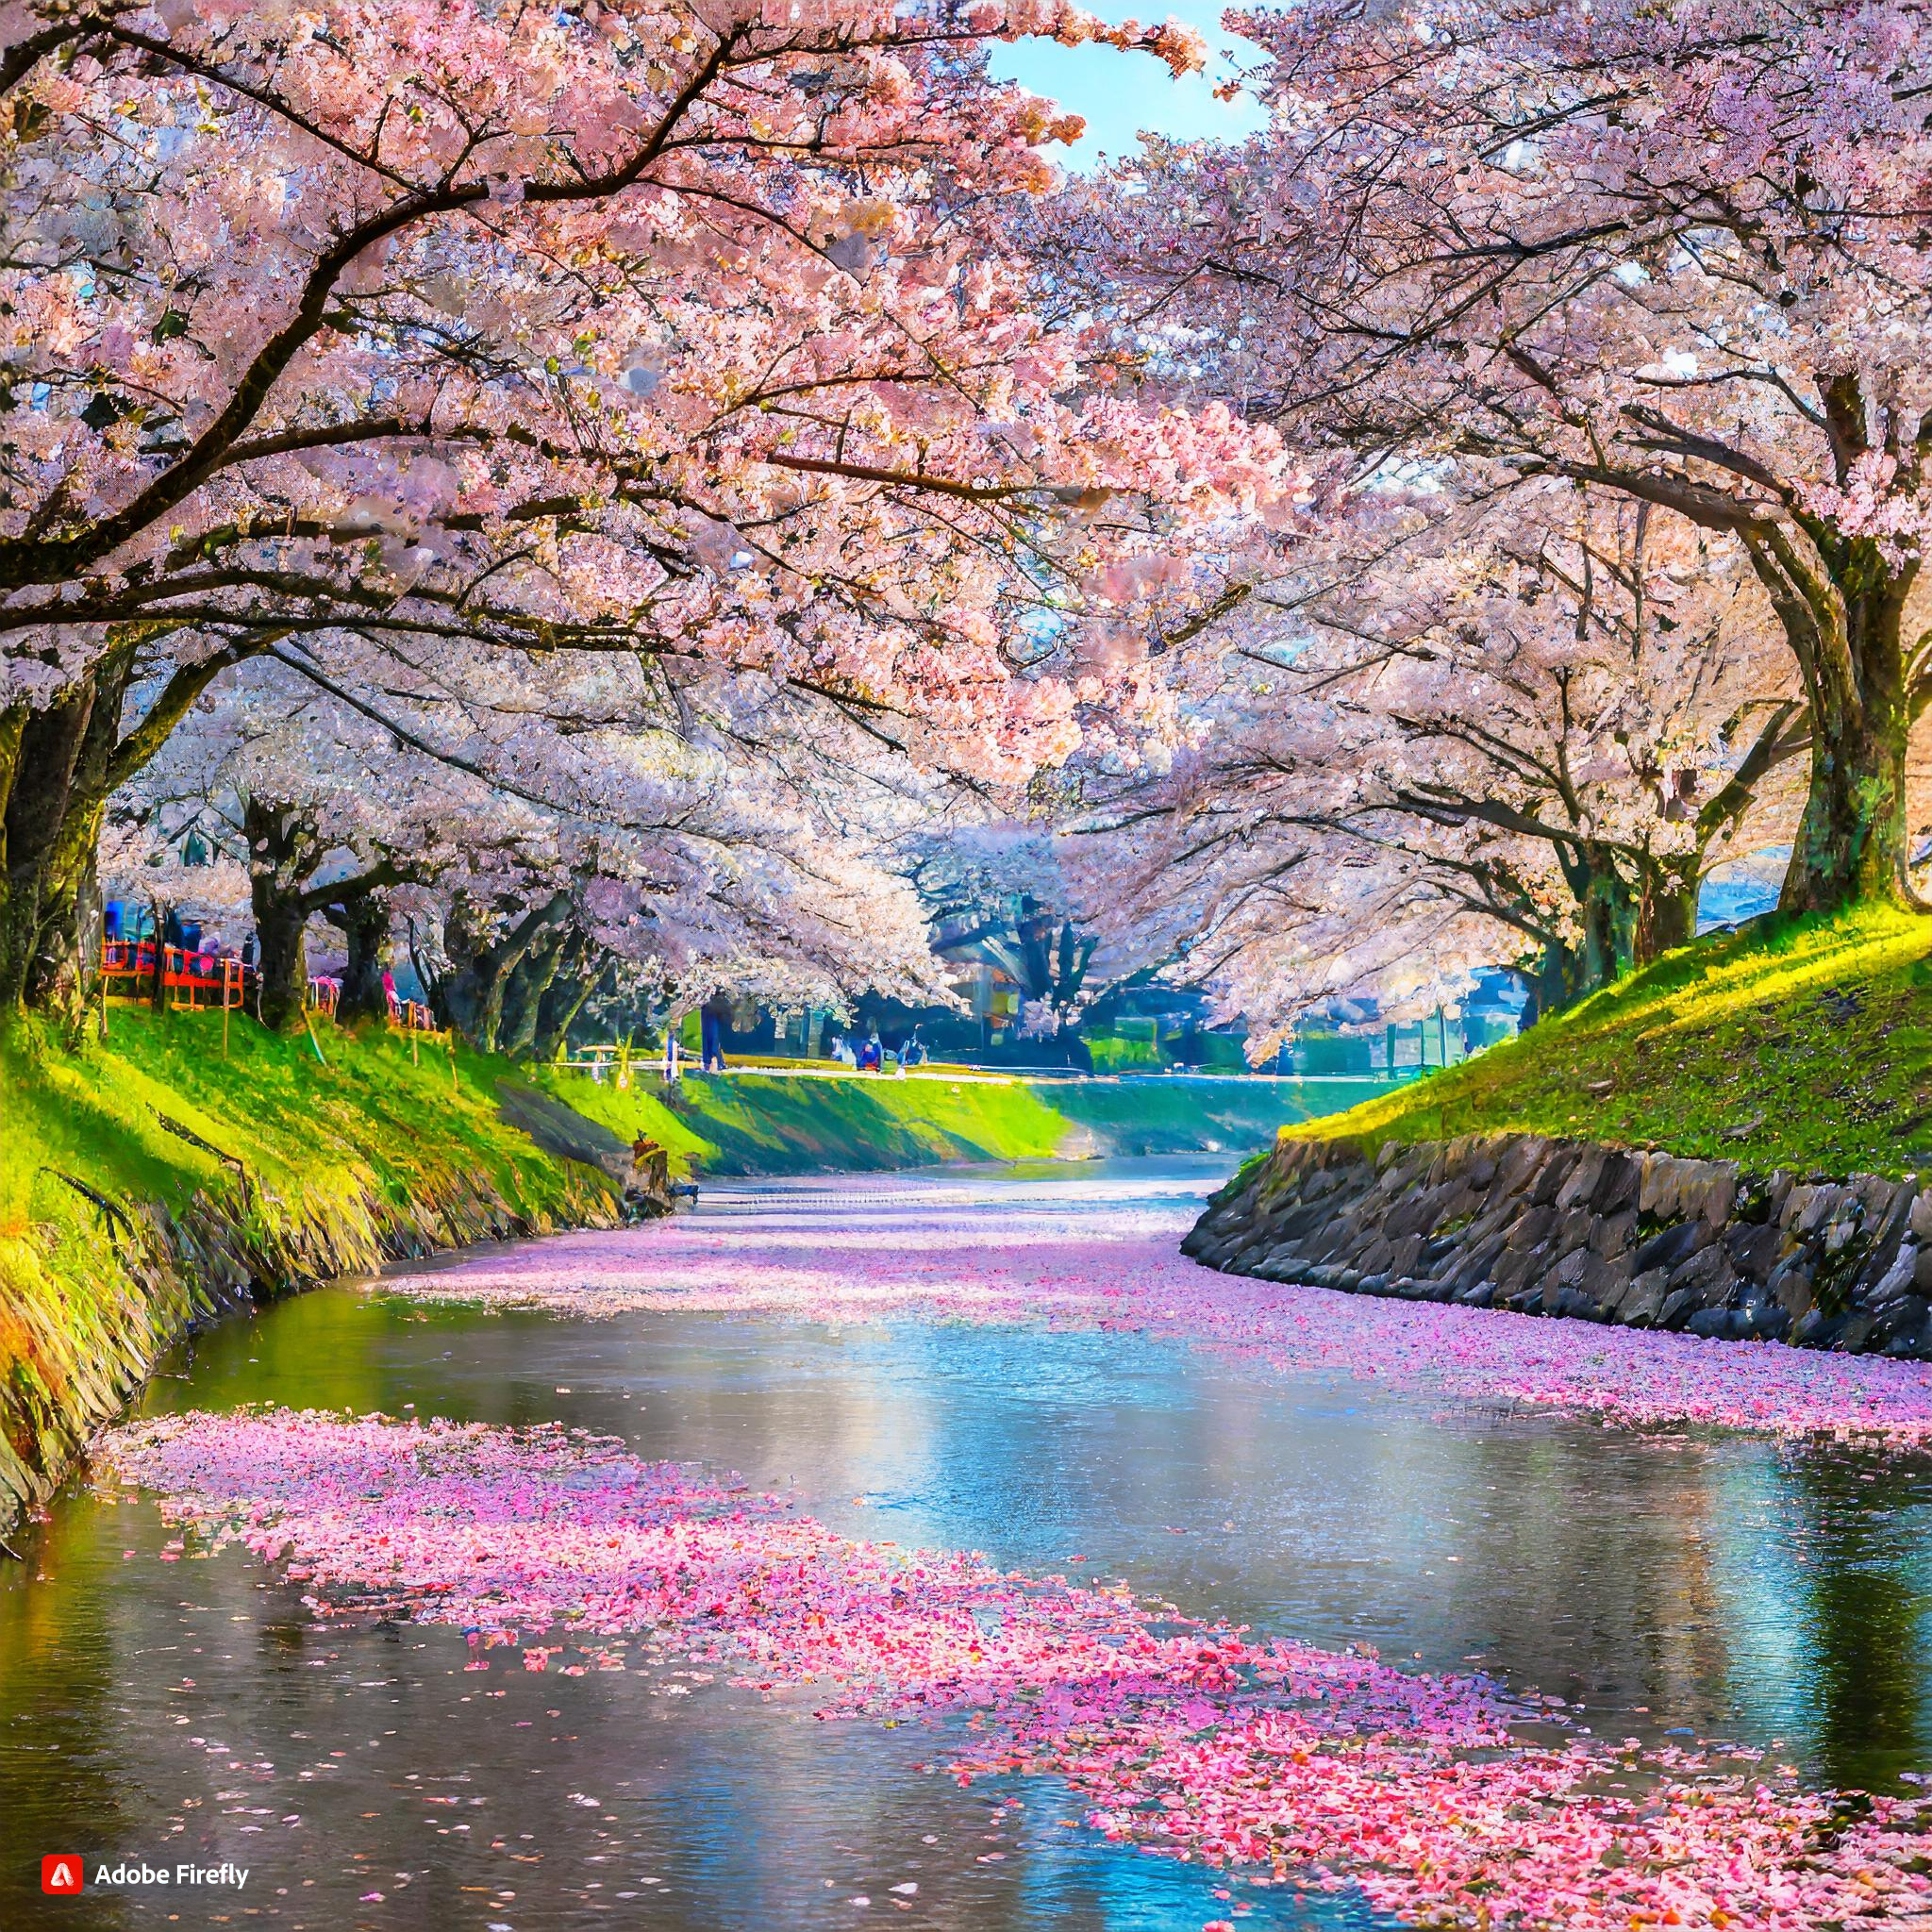  japan during cherry blossom season pink petals on the river between big cherry blossom trees